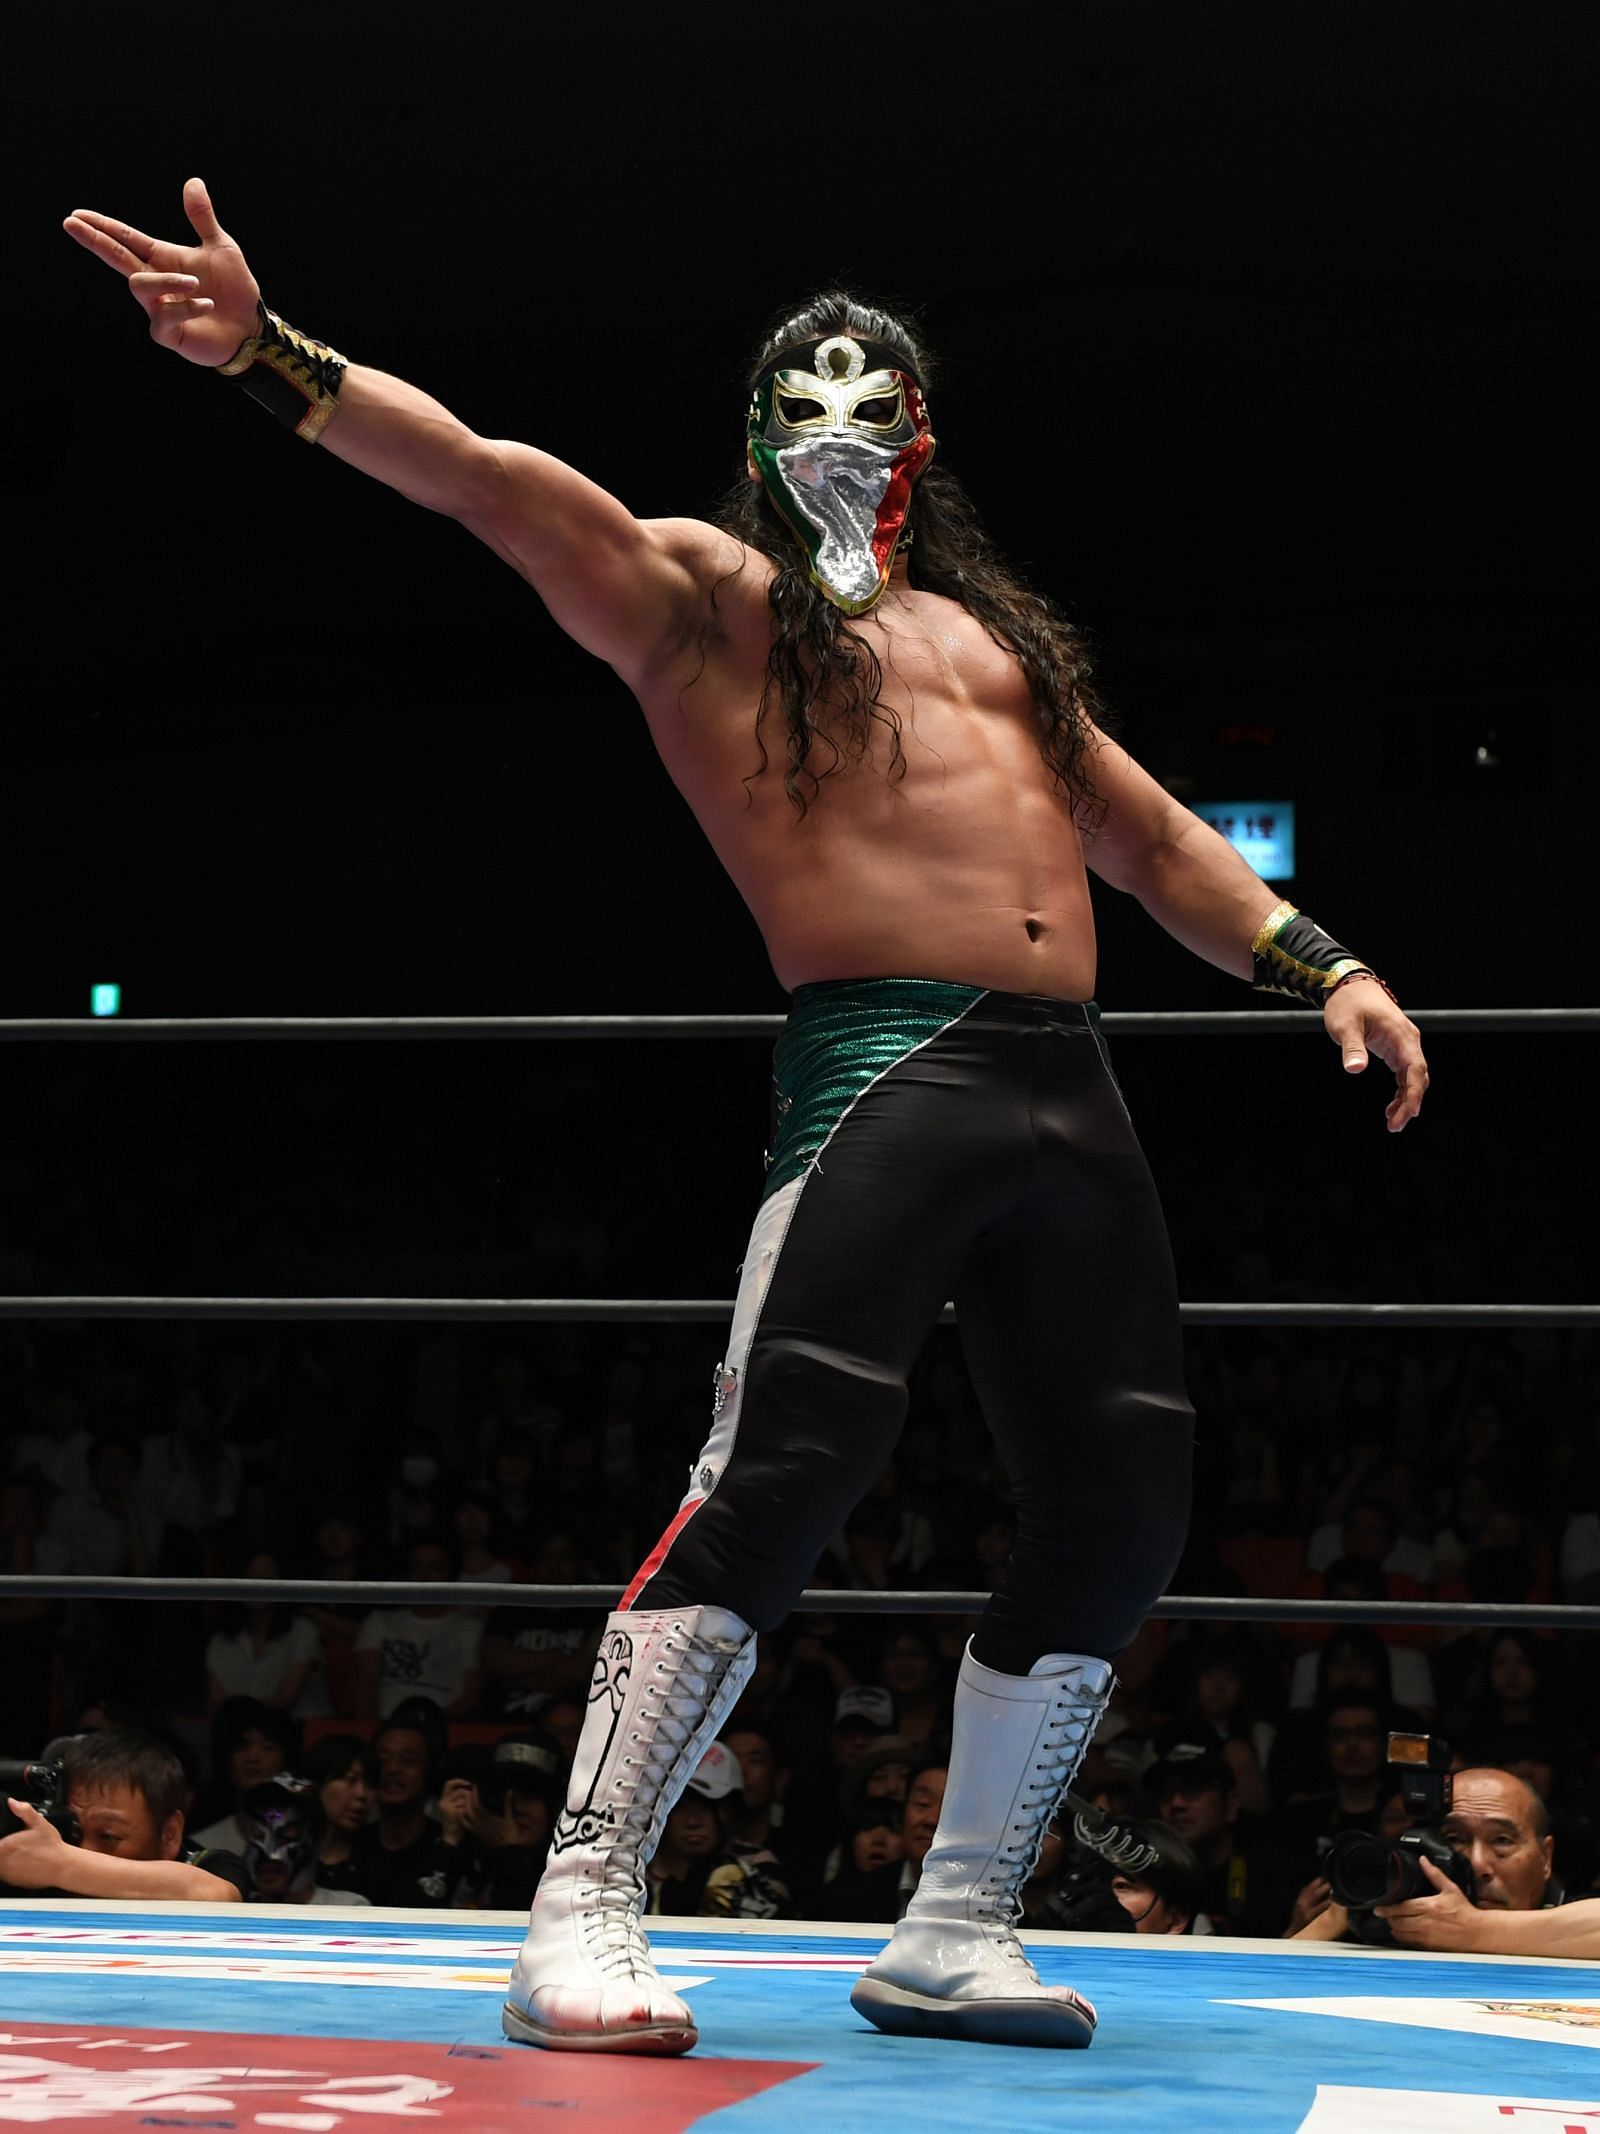 Bandido is a wrestler many fans have been hoping to see in AEW